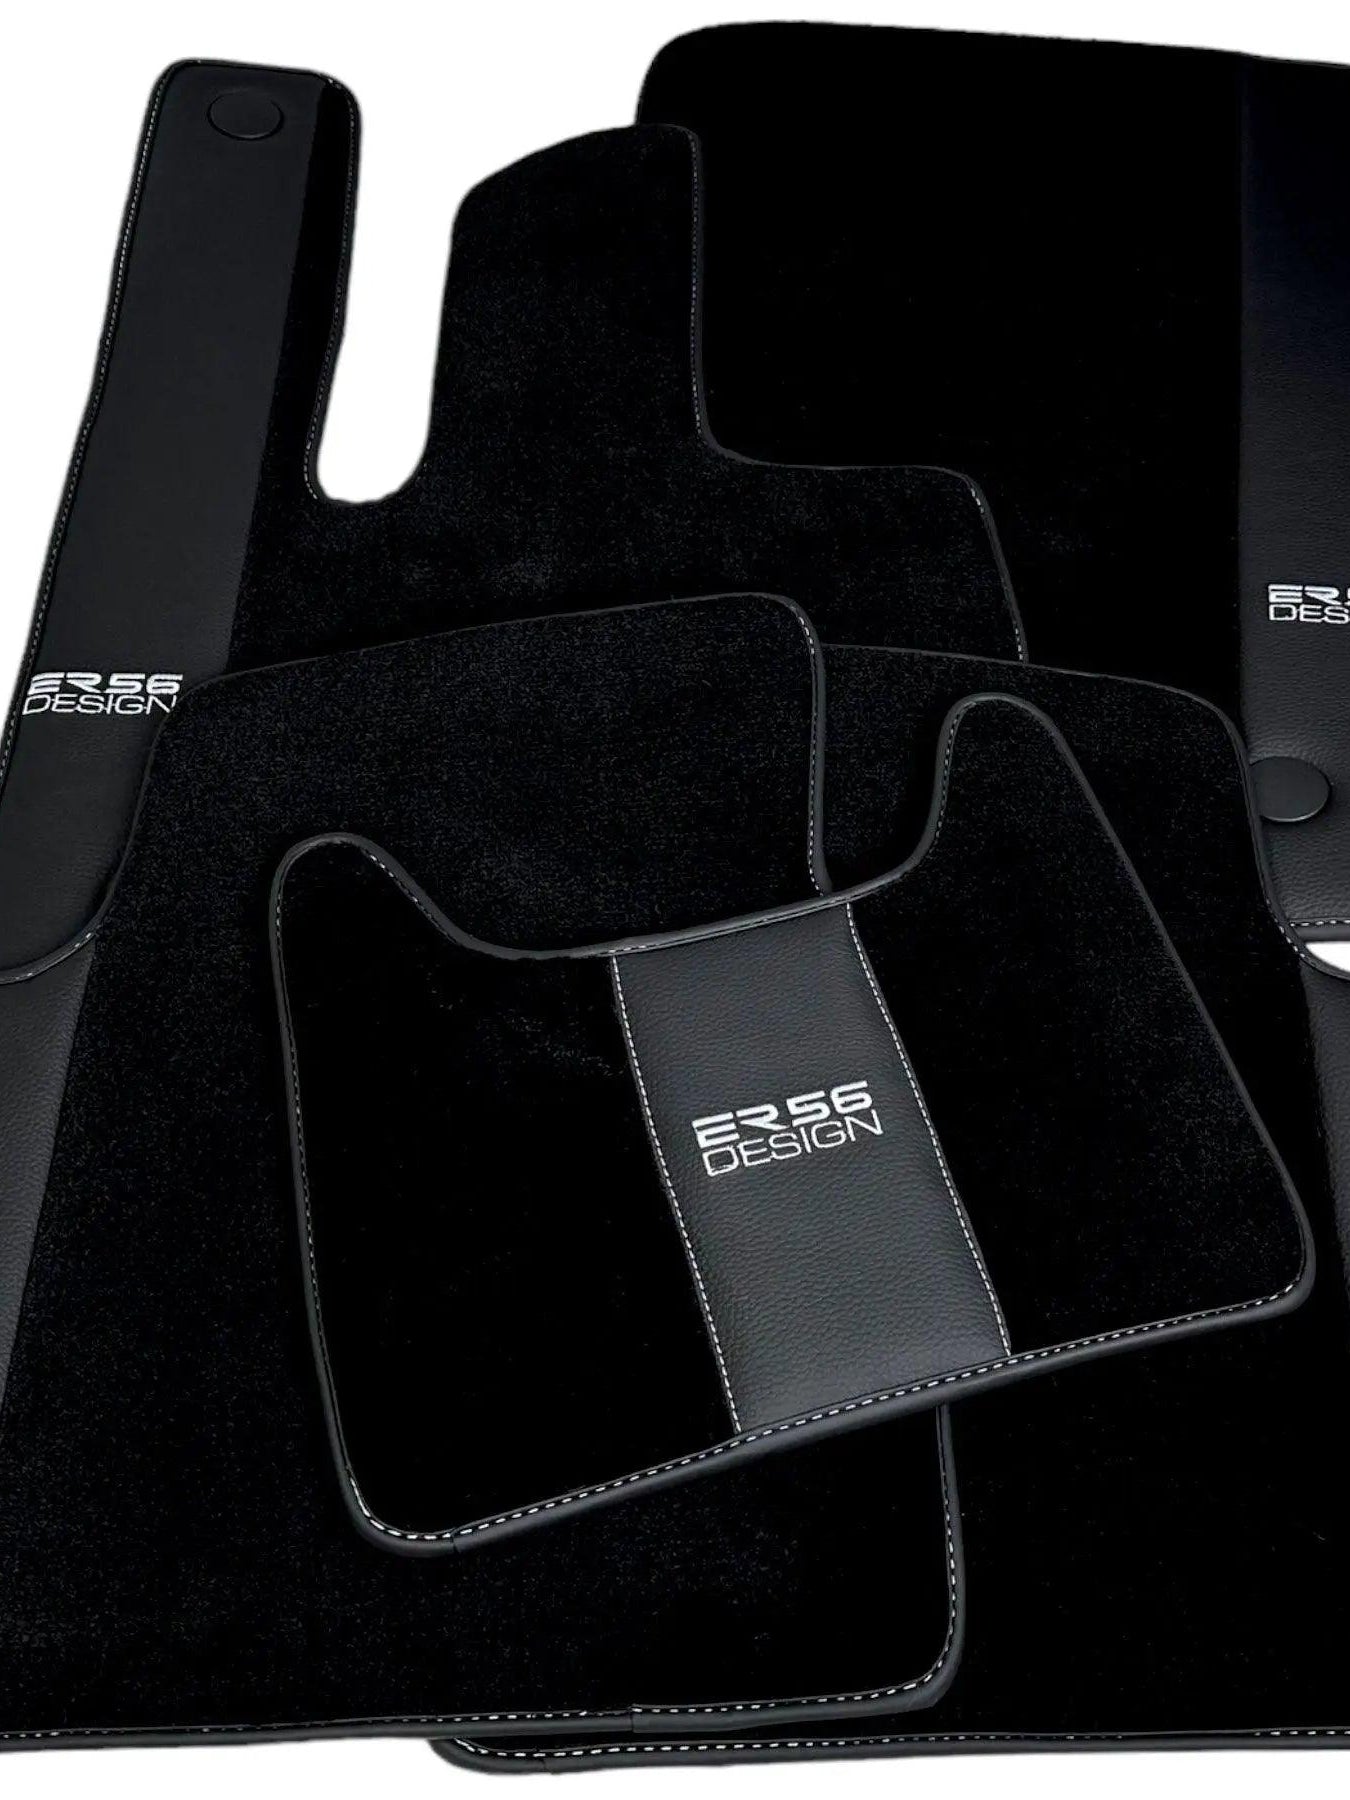 Black Floor Mats For Mercedes-Benz G Class W463 (2008-2018) With Leather Borders ER56 Design - AutoWin